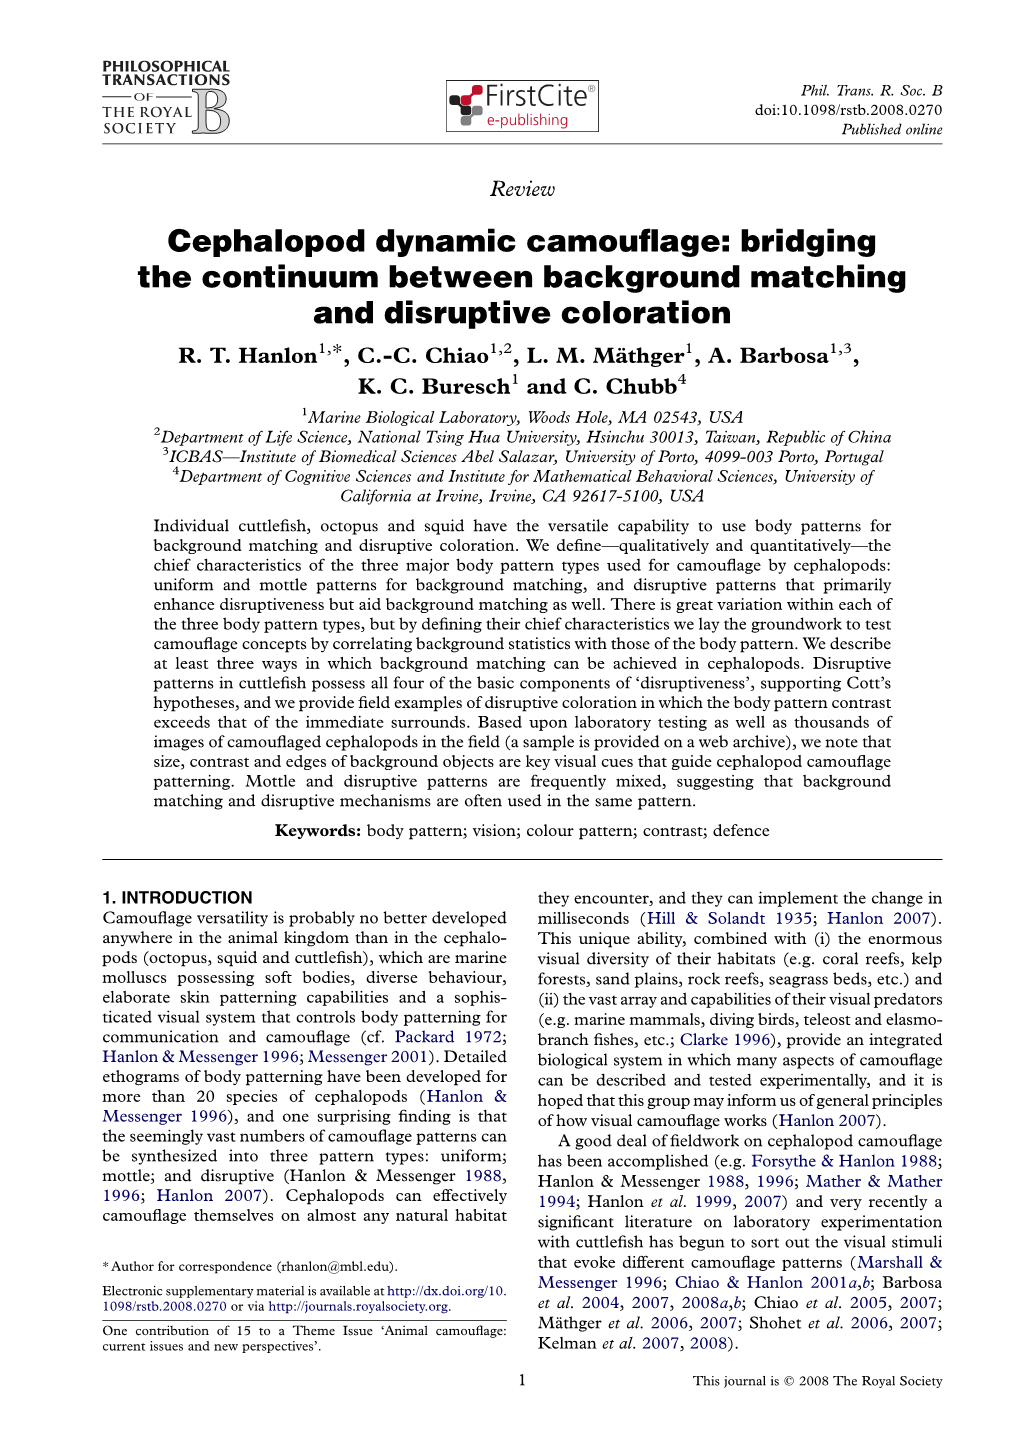 Cephalopod Dynamic Camouflage: Bridging the Continuum Between